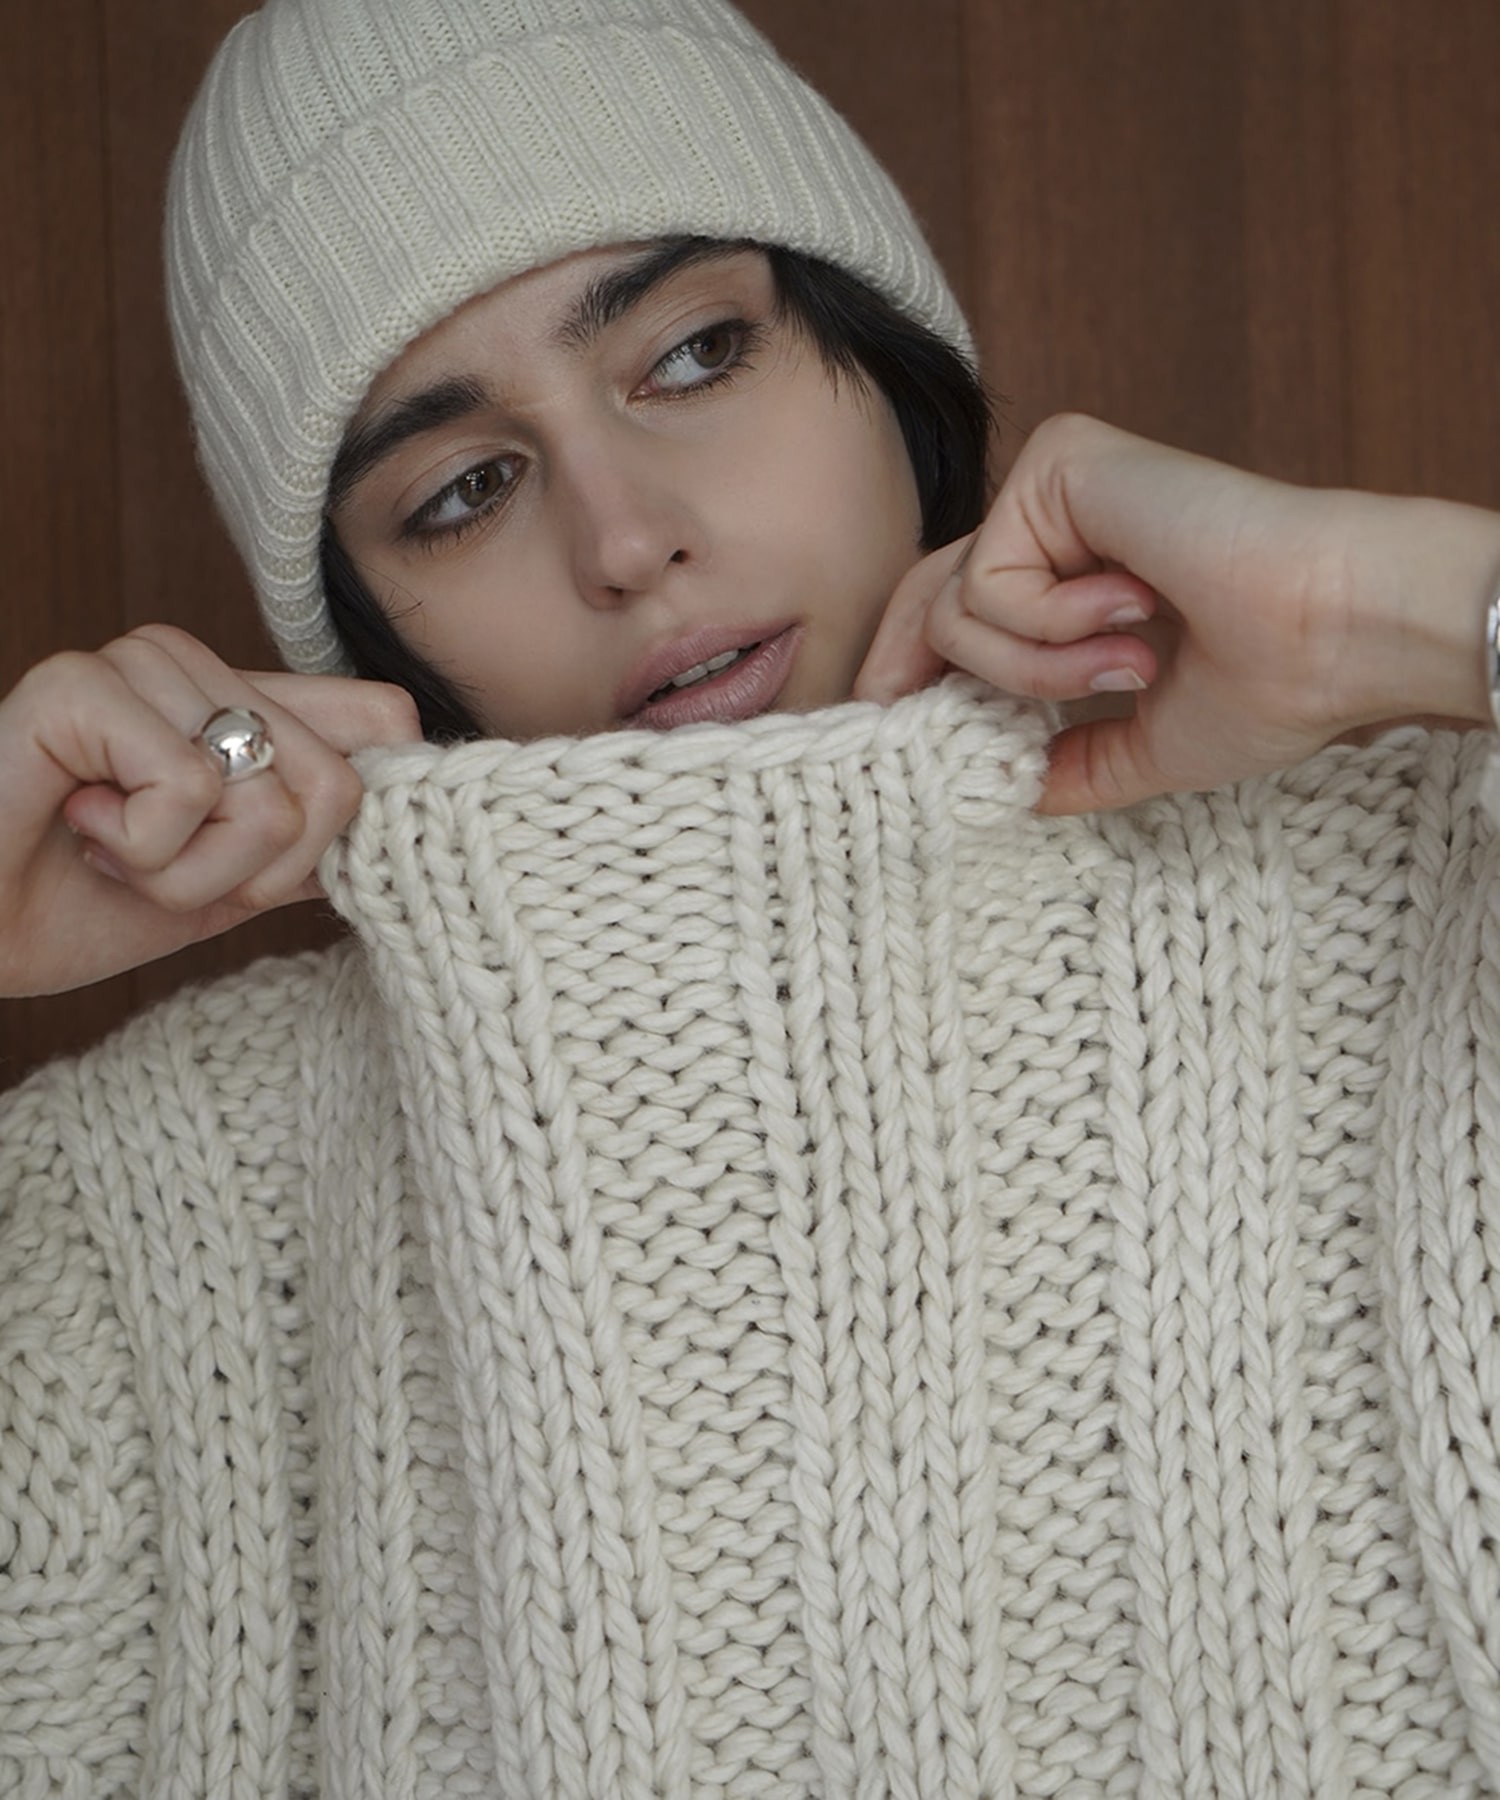 BULKY RIB HAND KNIT TOPS(1 IVORY): CLANE: WOMENS｜ STUDIOUS ONLINE